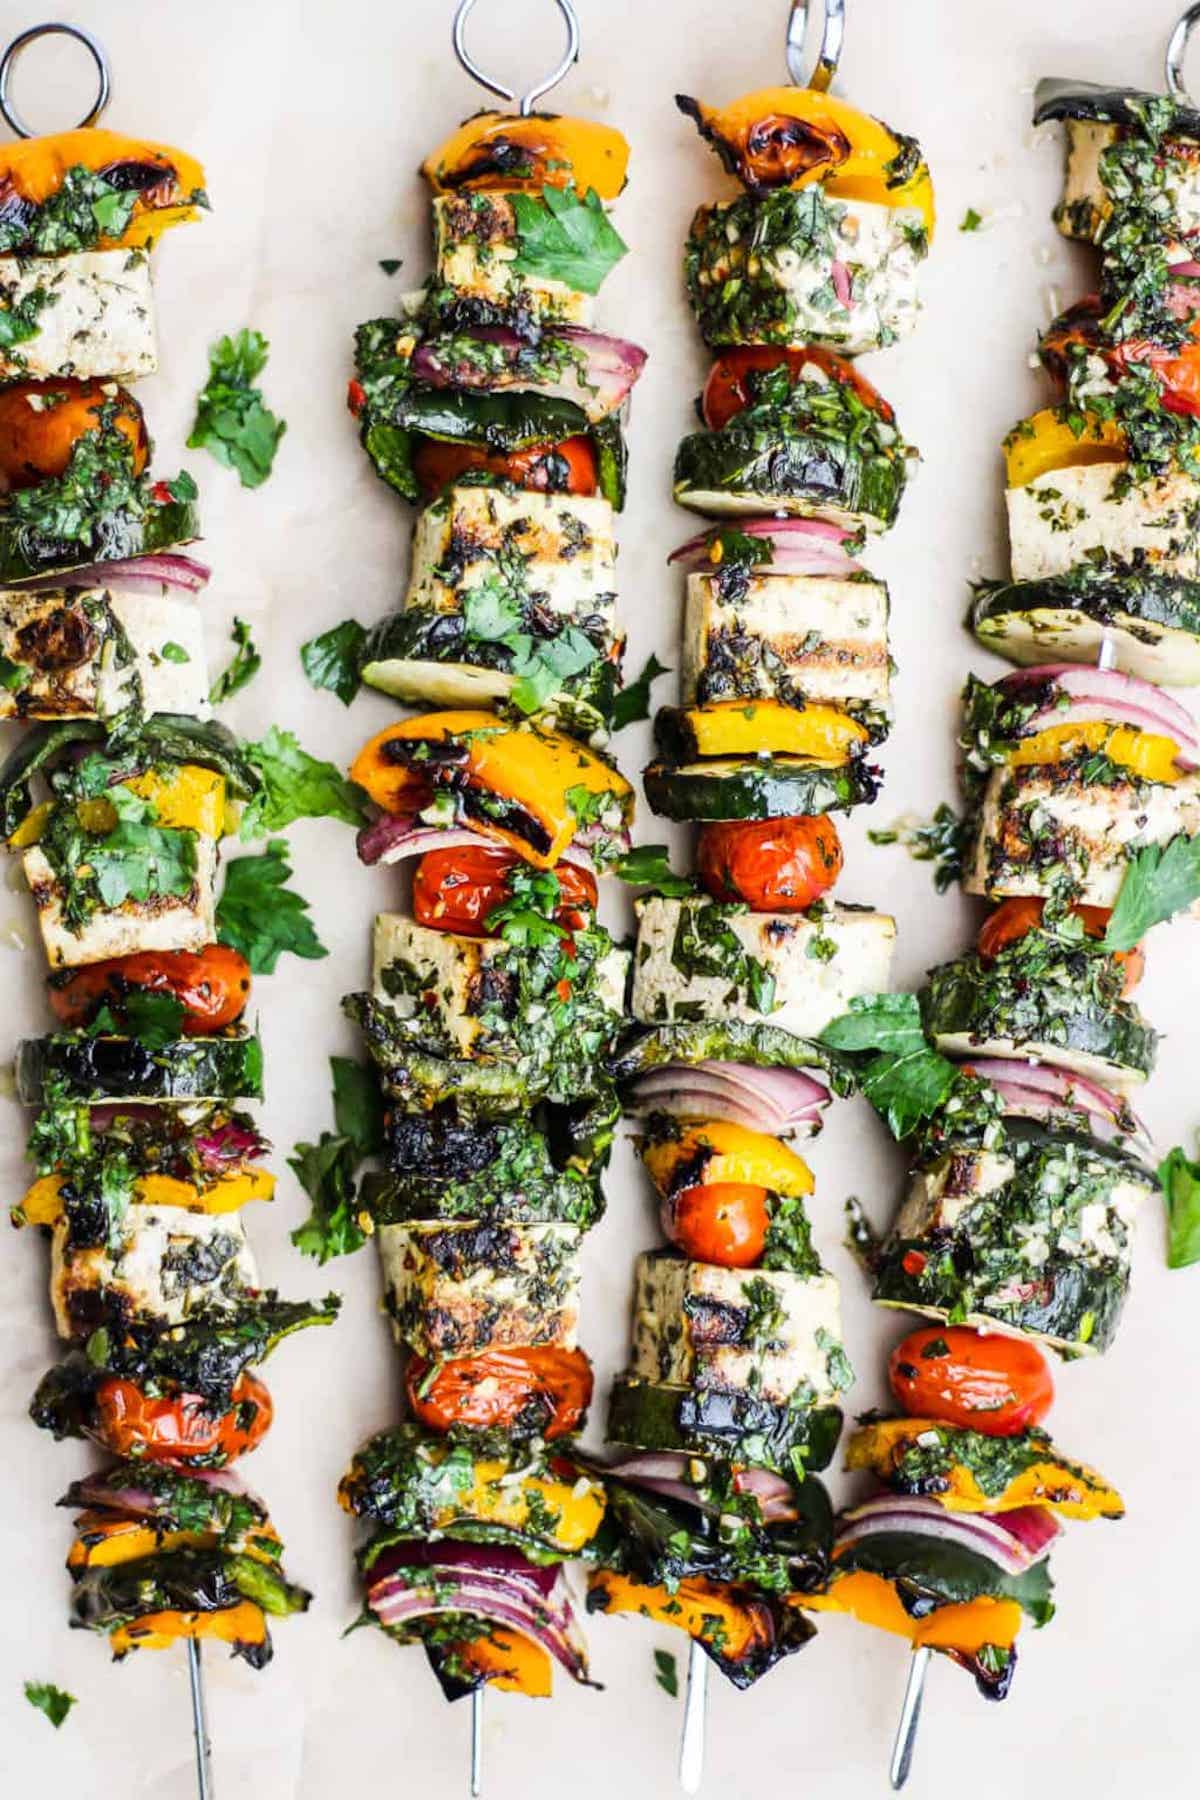 Tofu and vegetable skewers with chimichurri sauce.